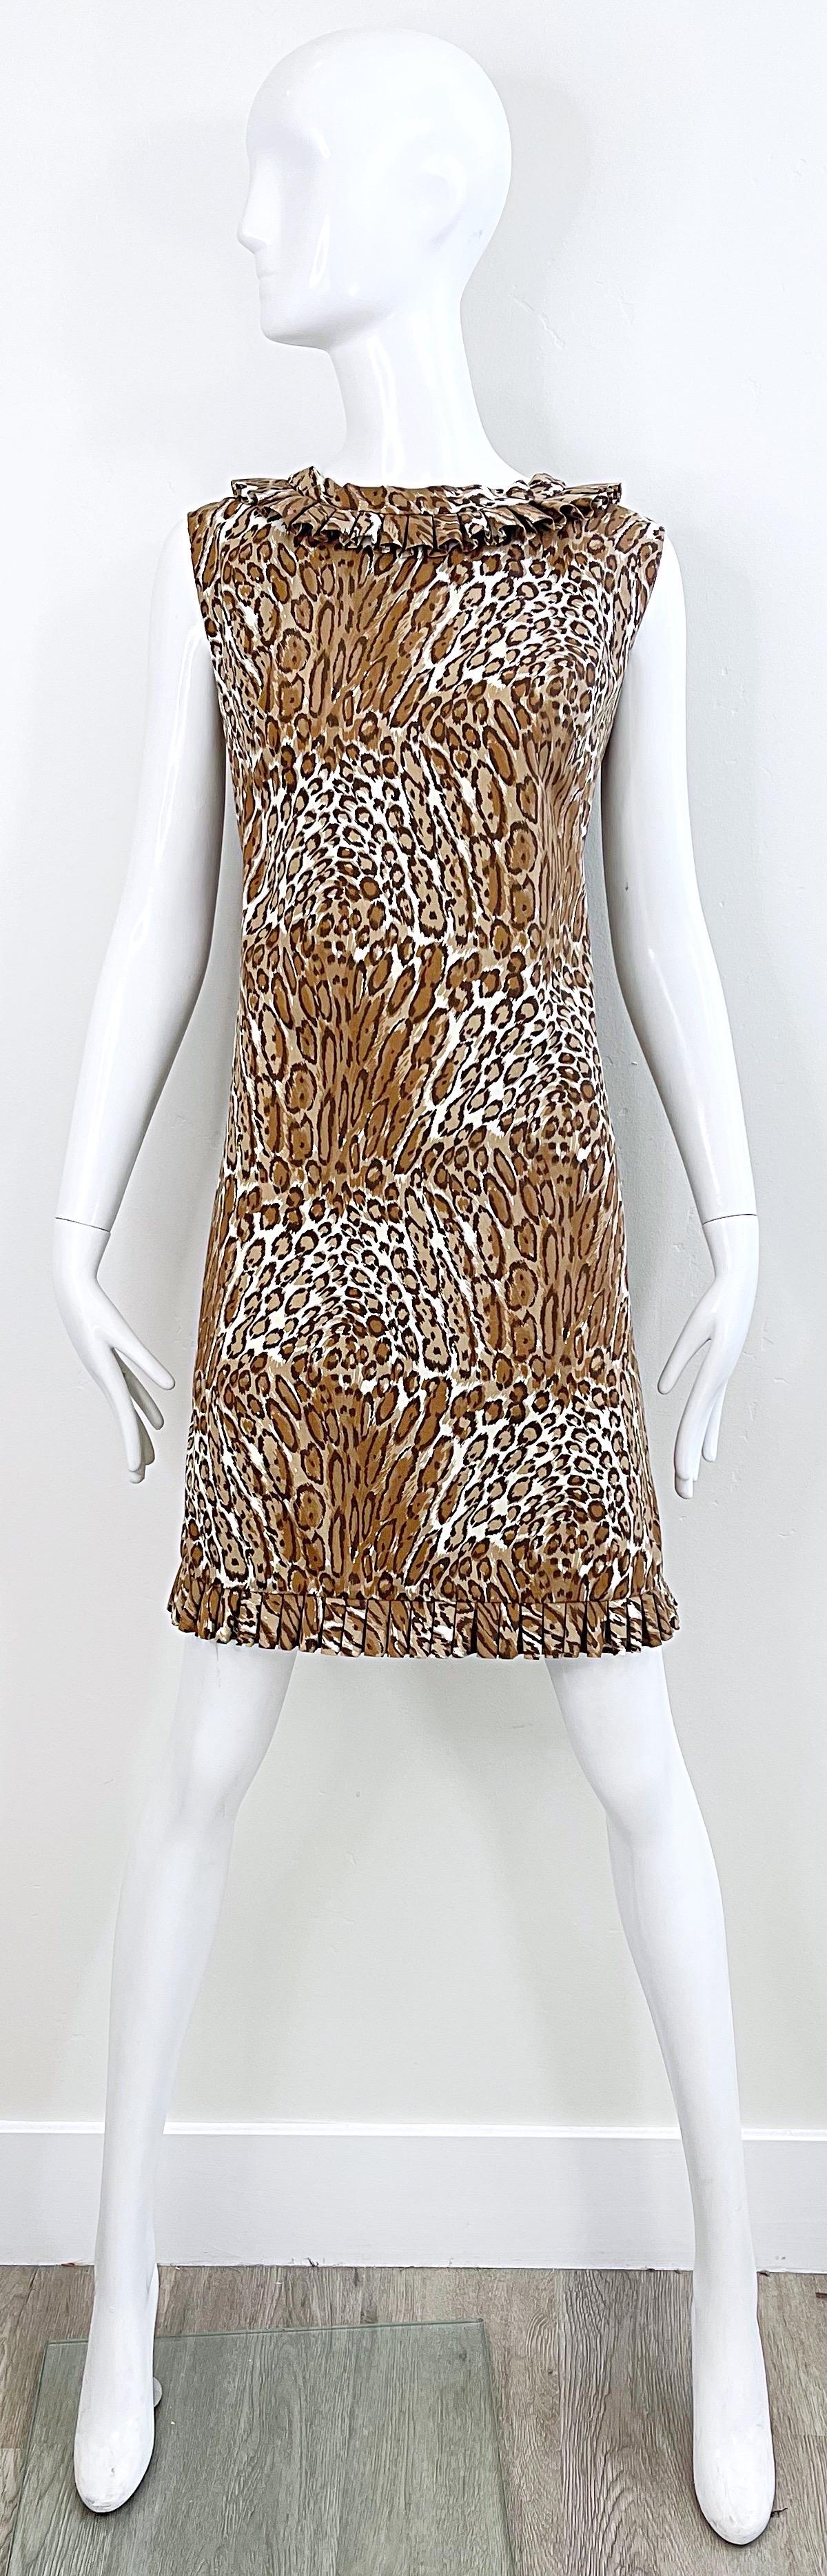 Chic 1960s leopard / cheetah abstract animal print cotton shirt dress ! Features ruffle details at collar and at hem. Full metal zipper up the back with hook-and-eye closure. Single pocket at left side of waist. Very well made. Perfect to go from